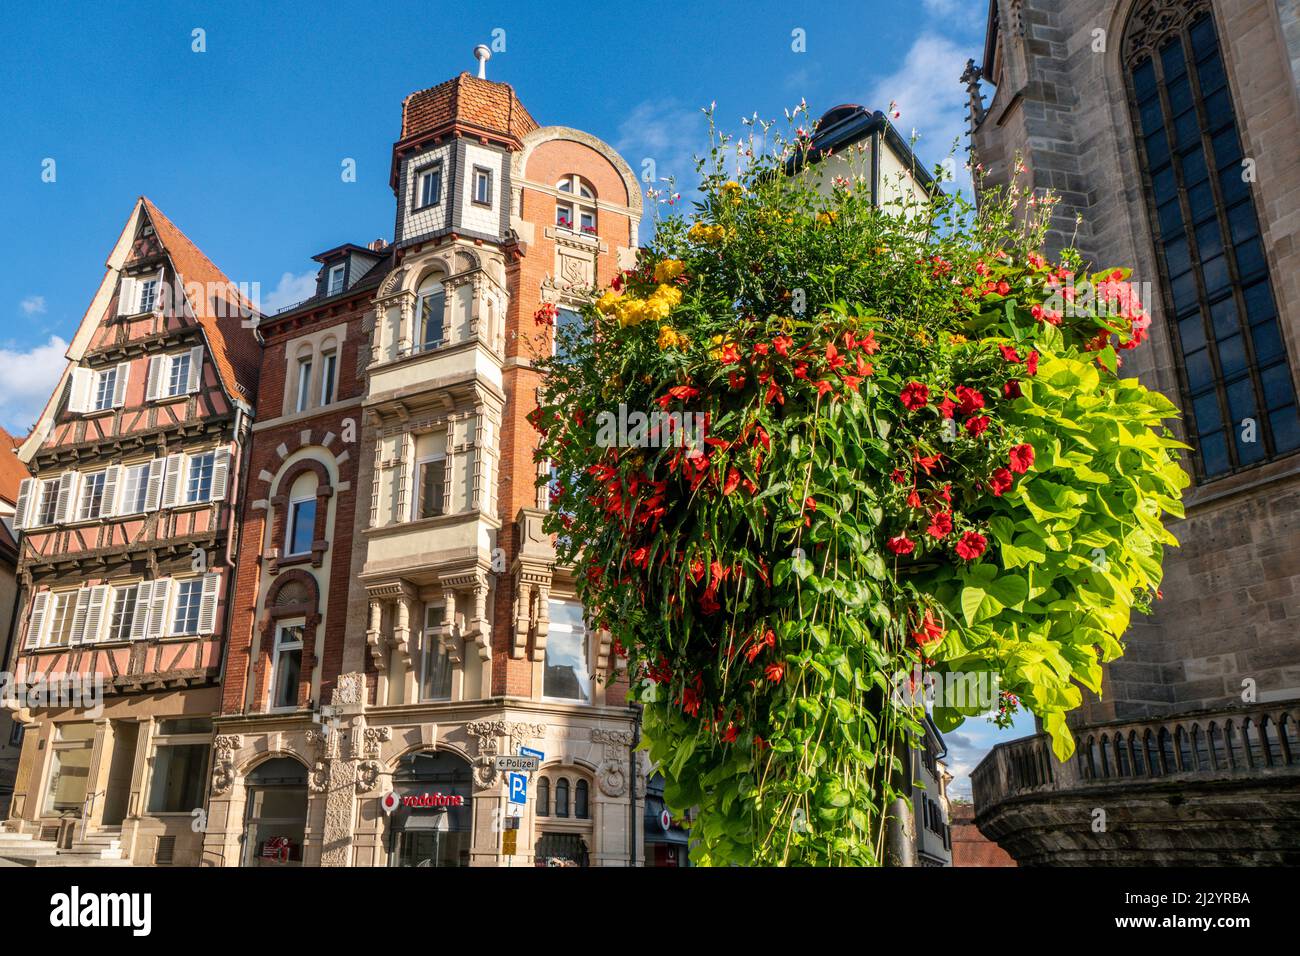 Medieval facades in the historic center of Tuebingen at the collegiate church St. Georg, Baden Wuerttemberg, Germany Stock Photo